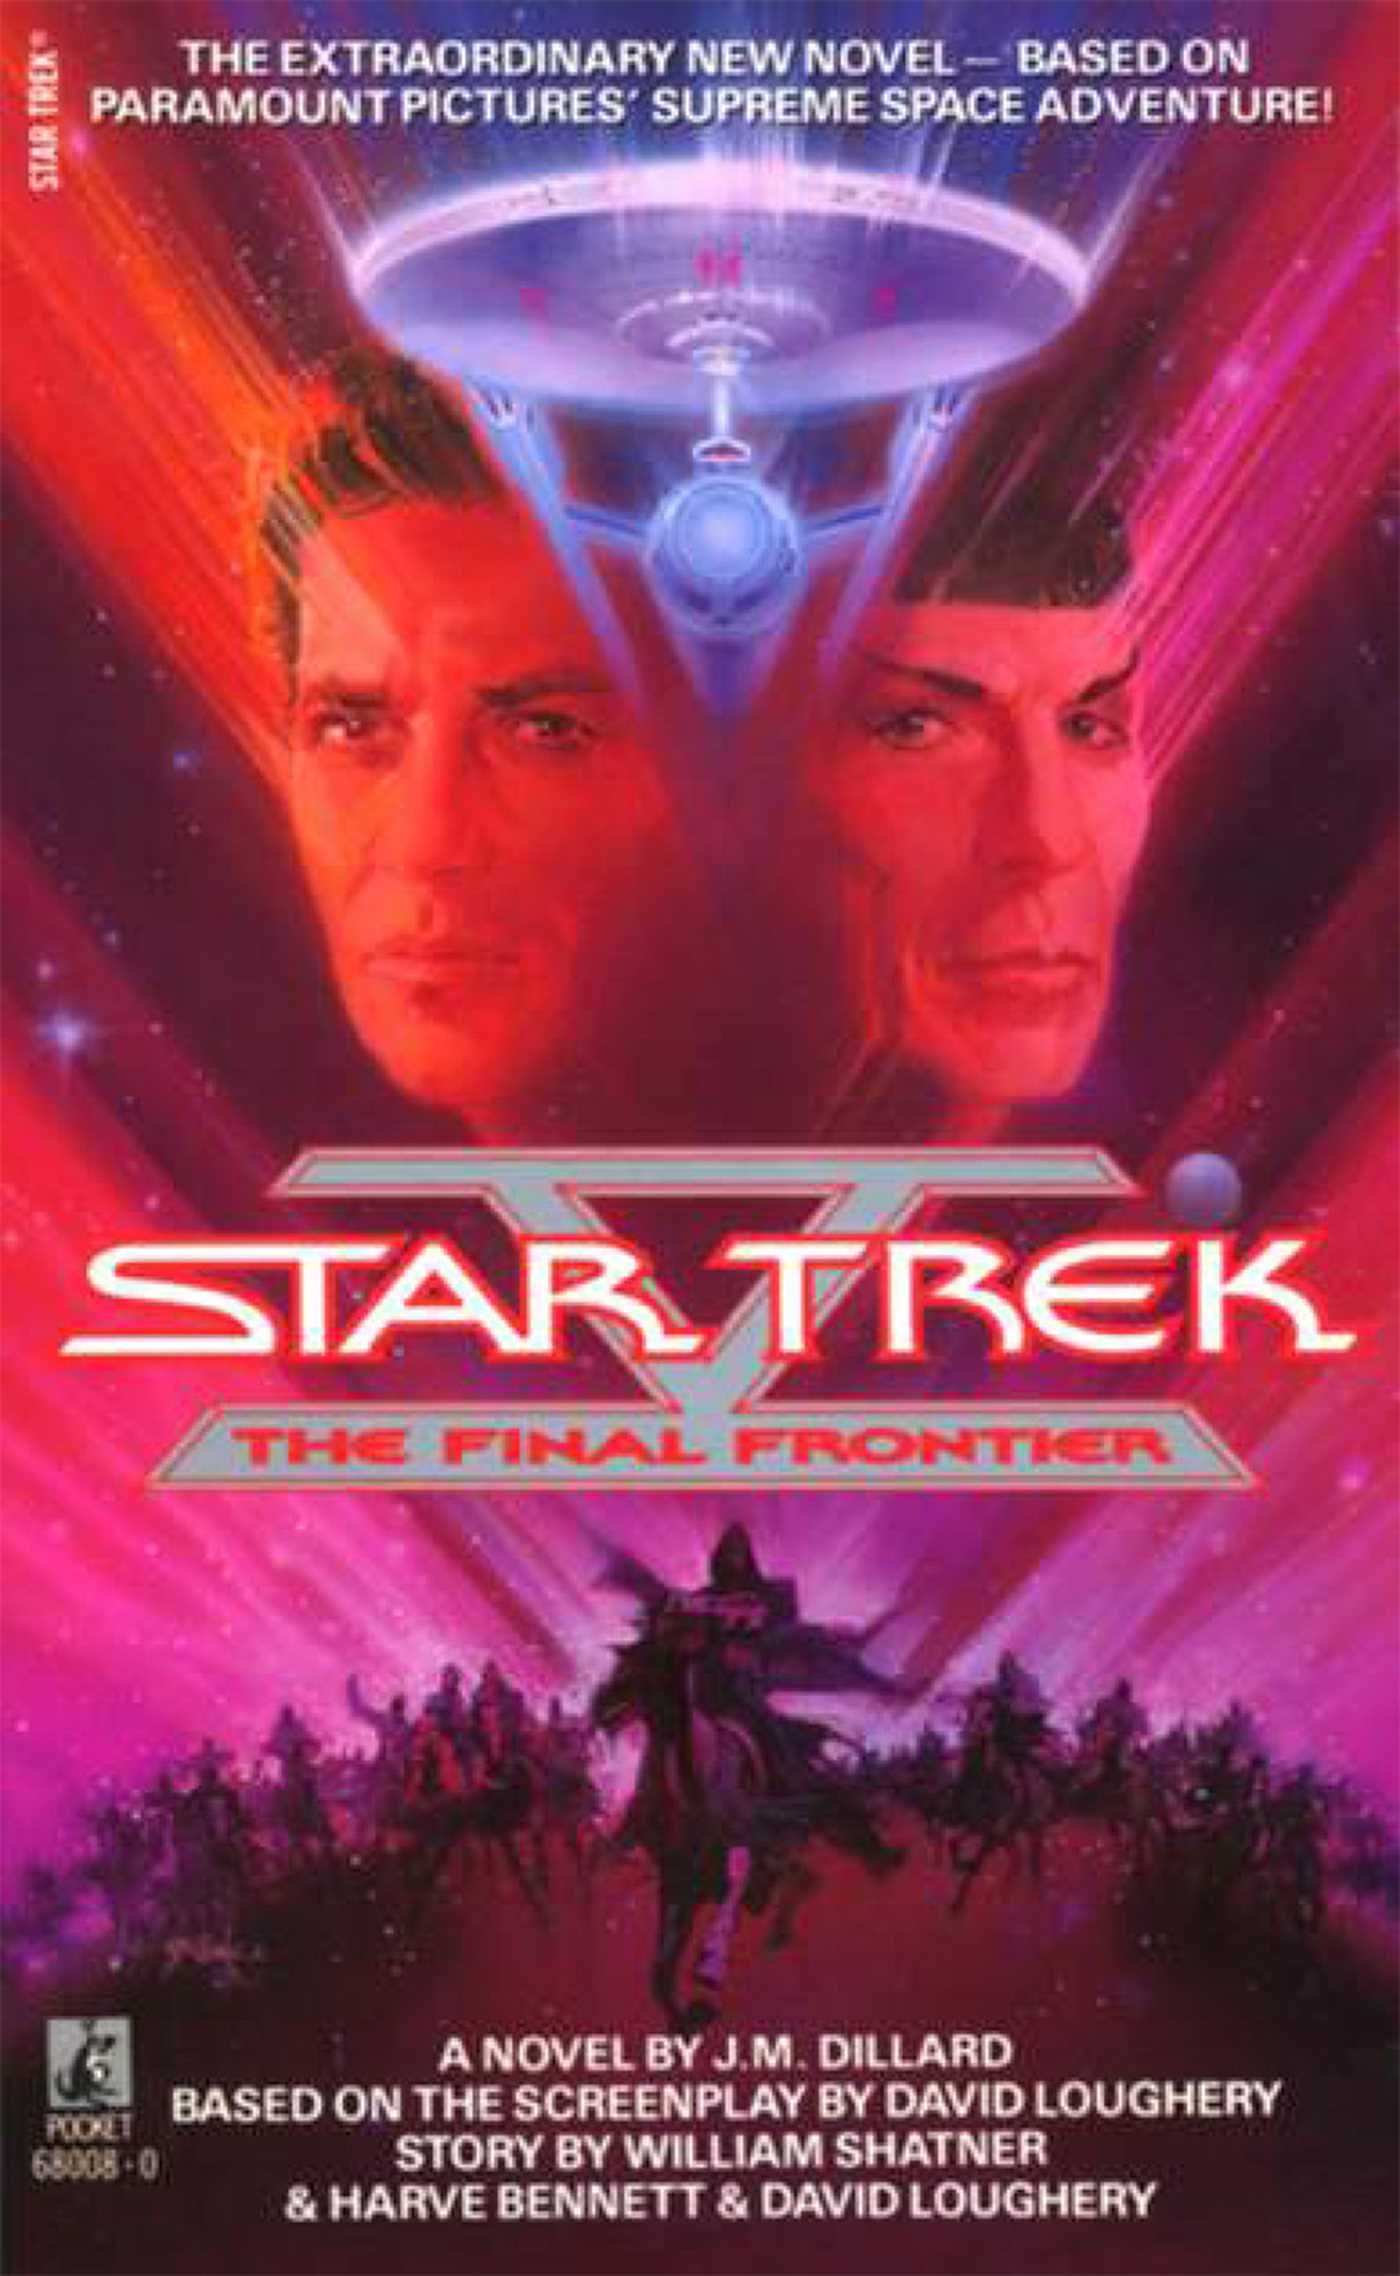 “Star Trek V: The Final Frontier” Review by Redshirtsalwaysdie.com